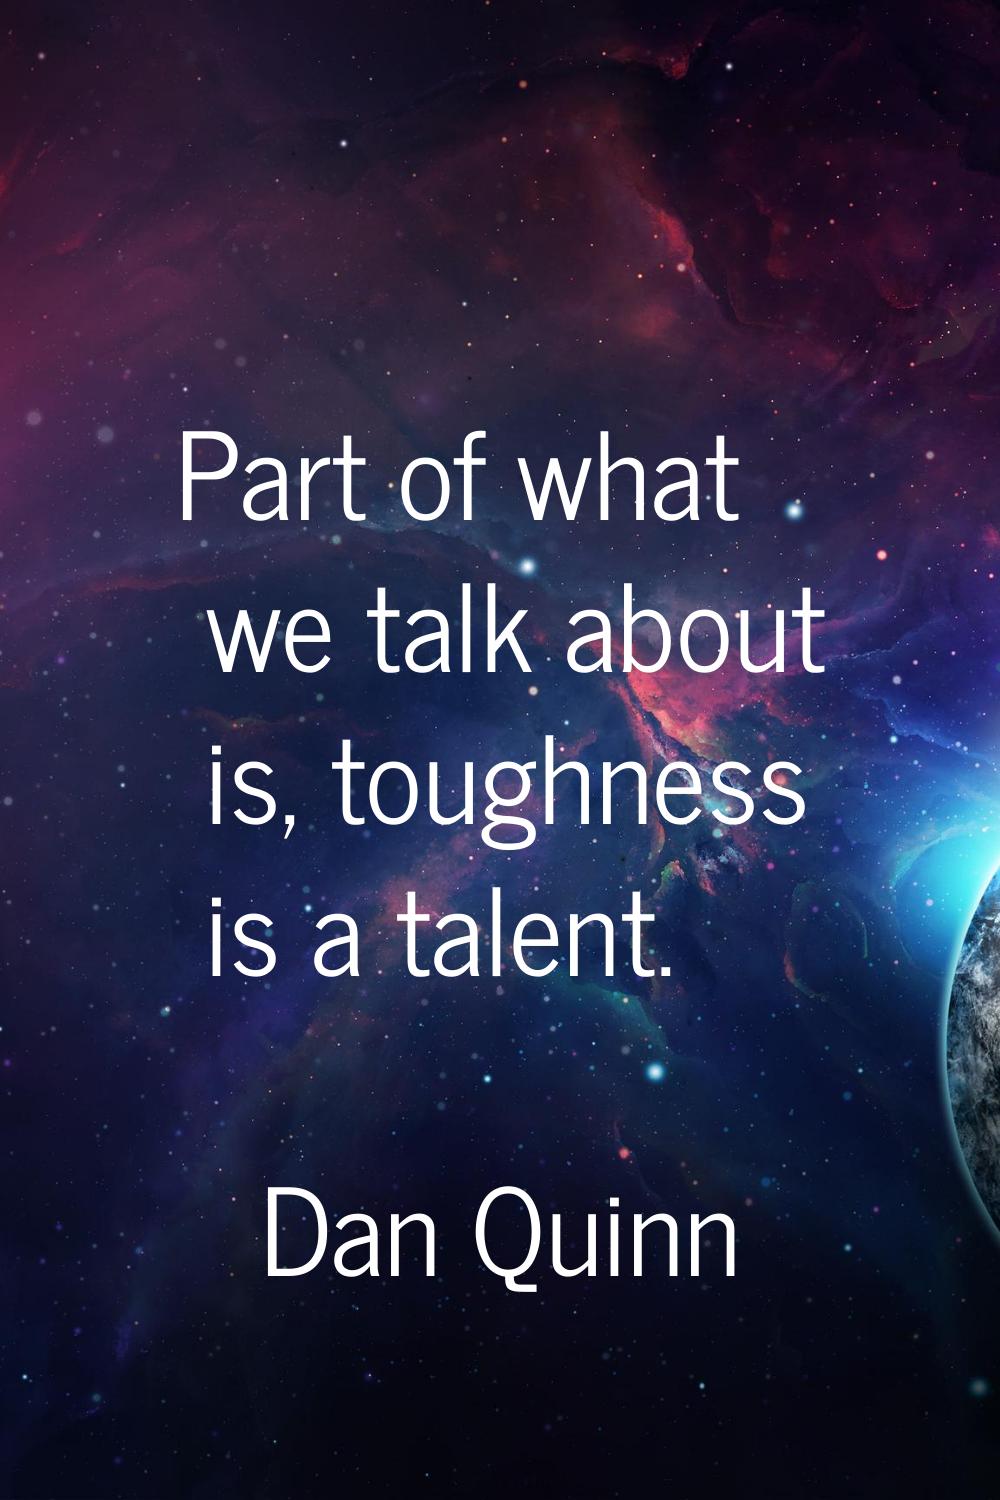 Part of what we talk about is, toughness is a talent.